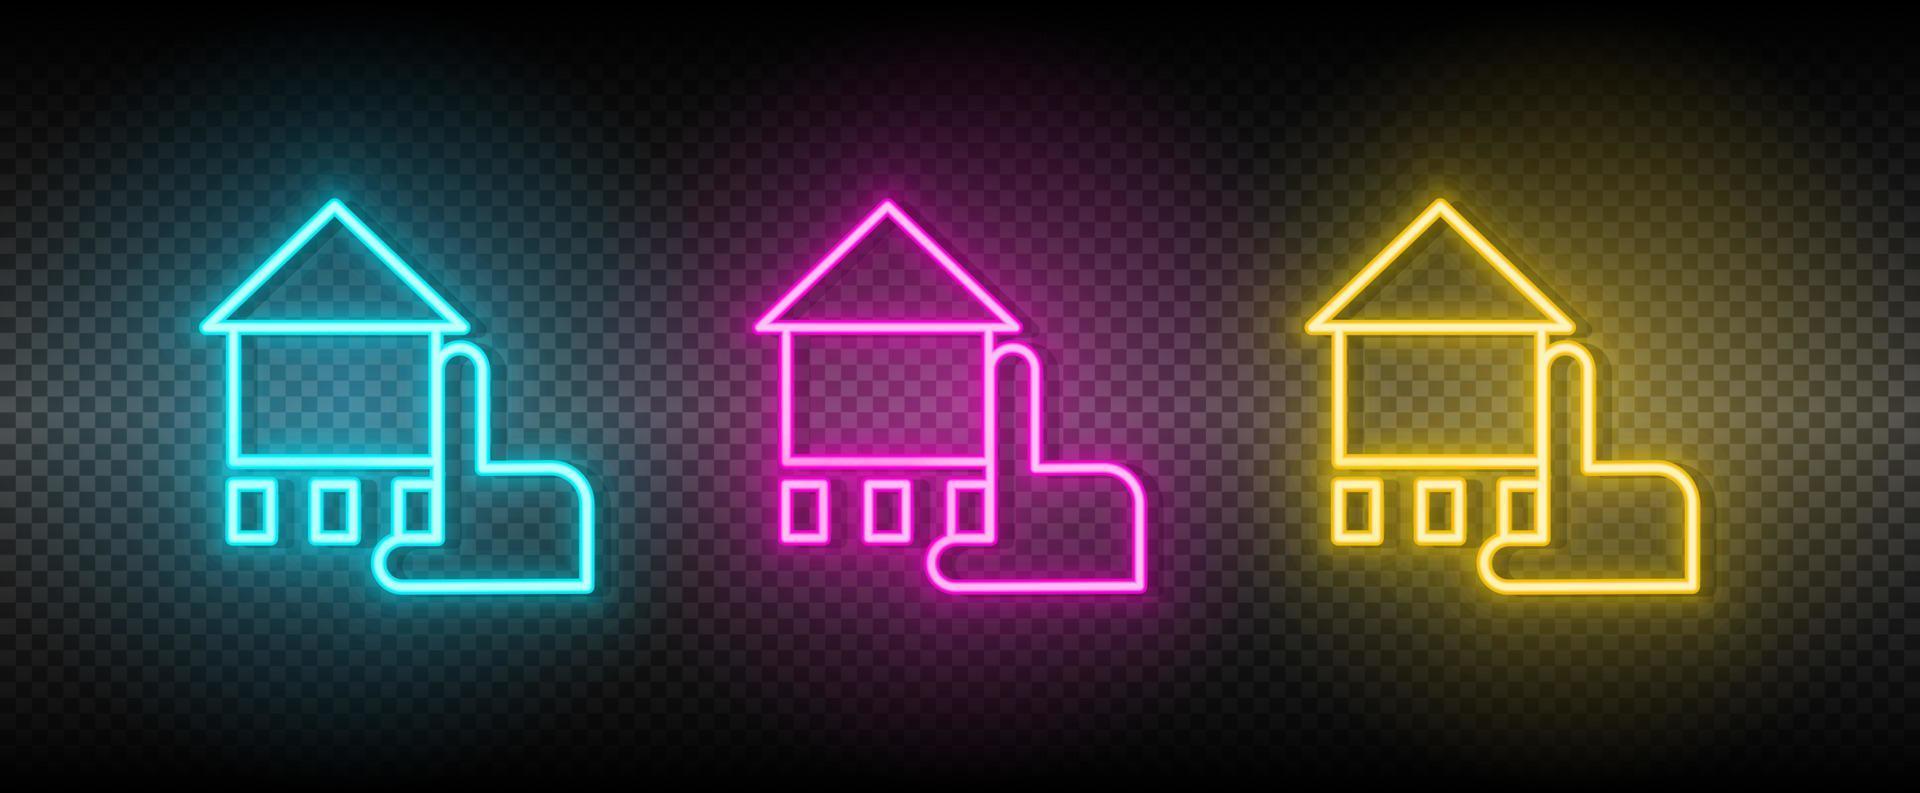 Real estate vector chalk, hand, house. Illustration neon blue, yellow, red icon set